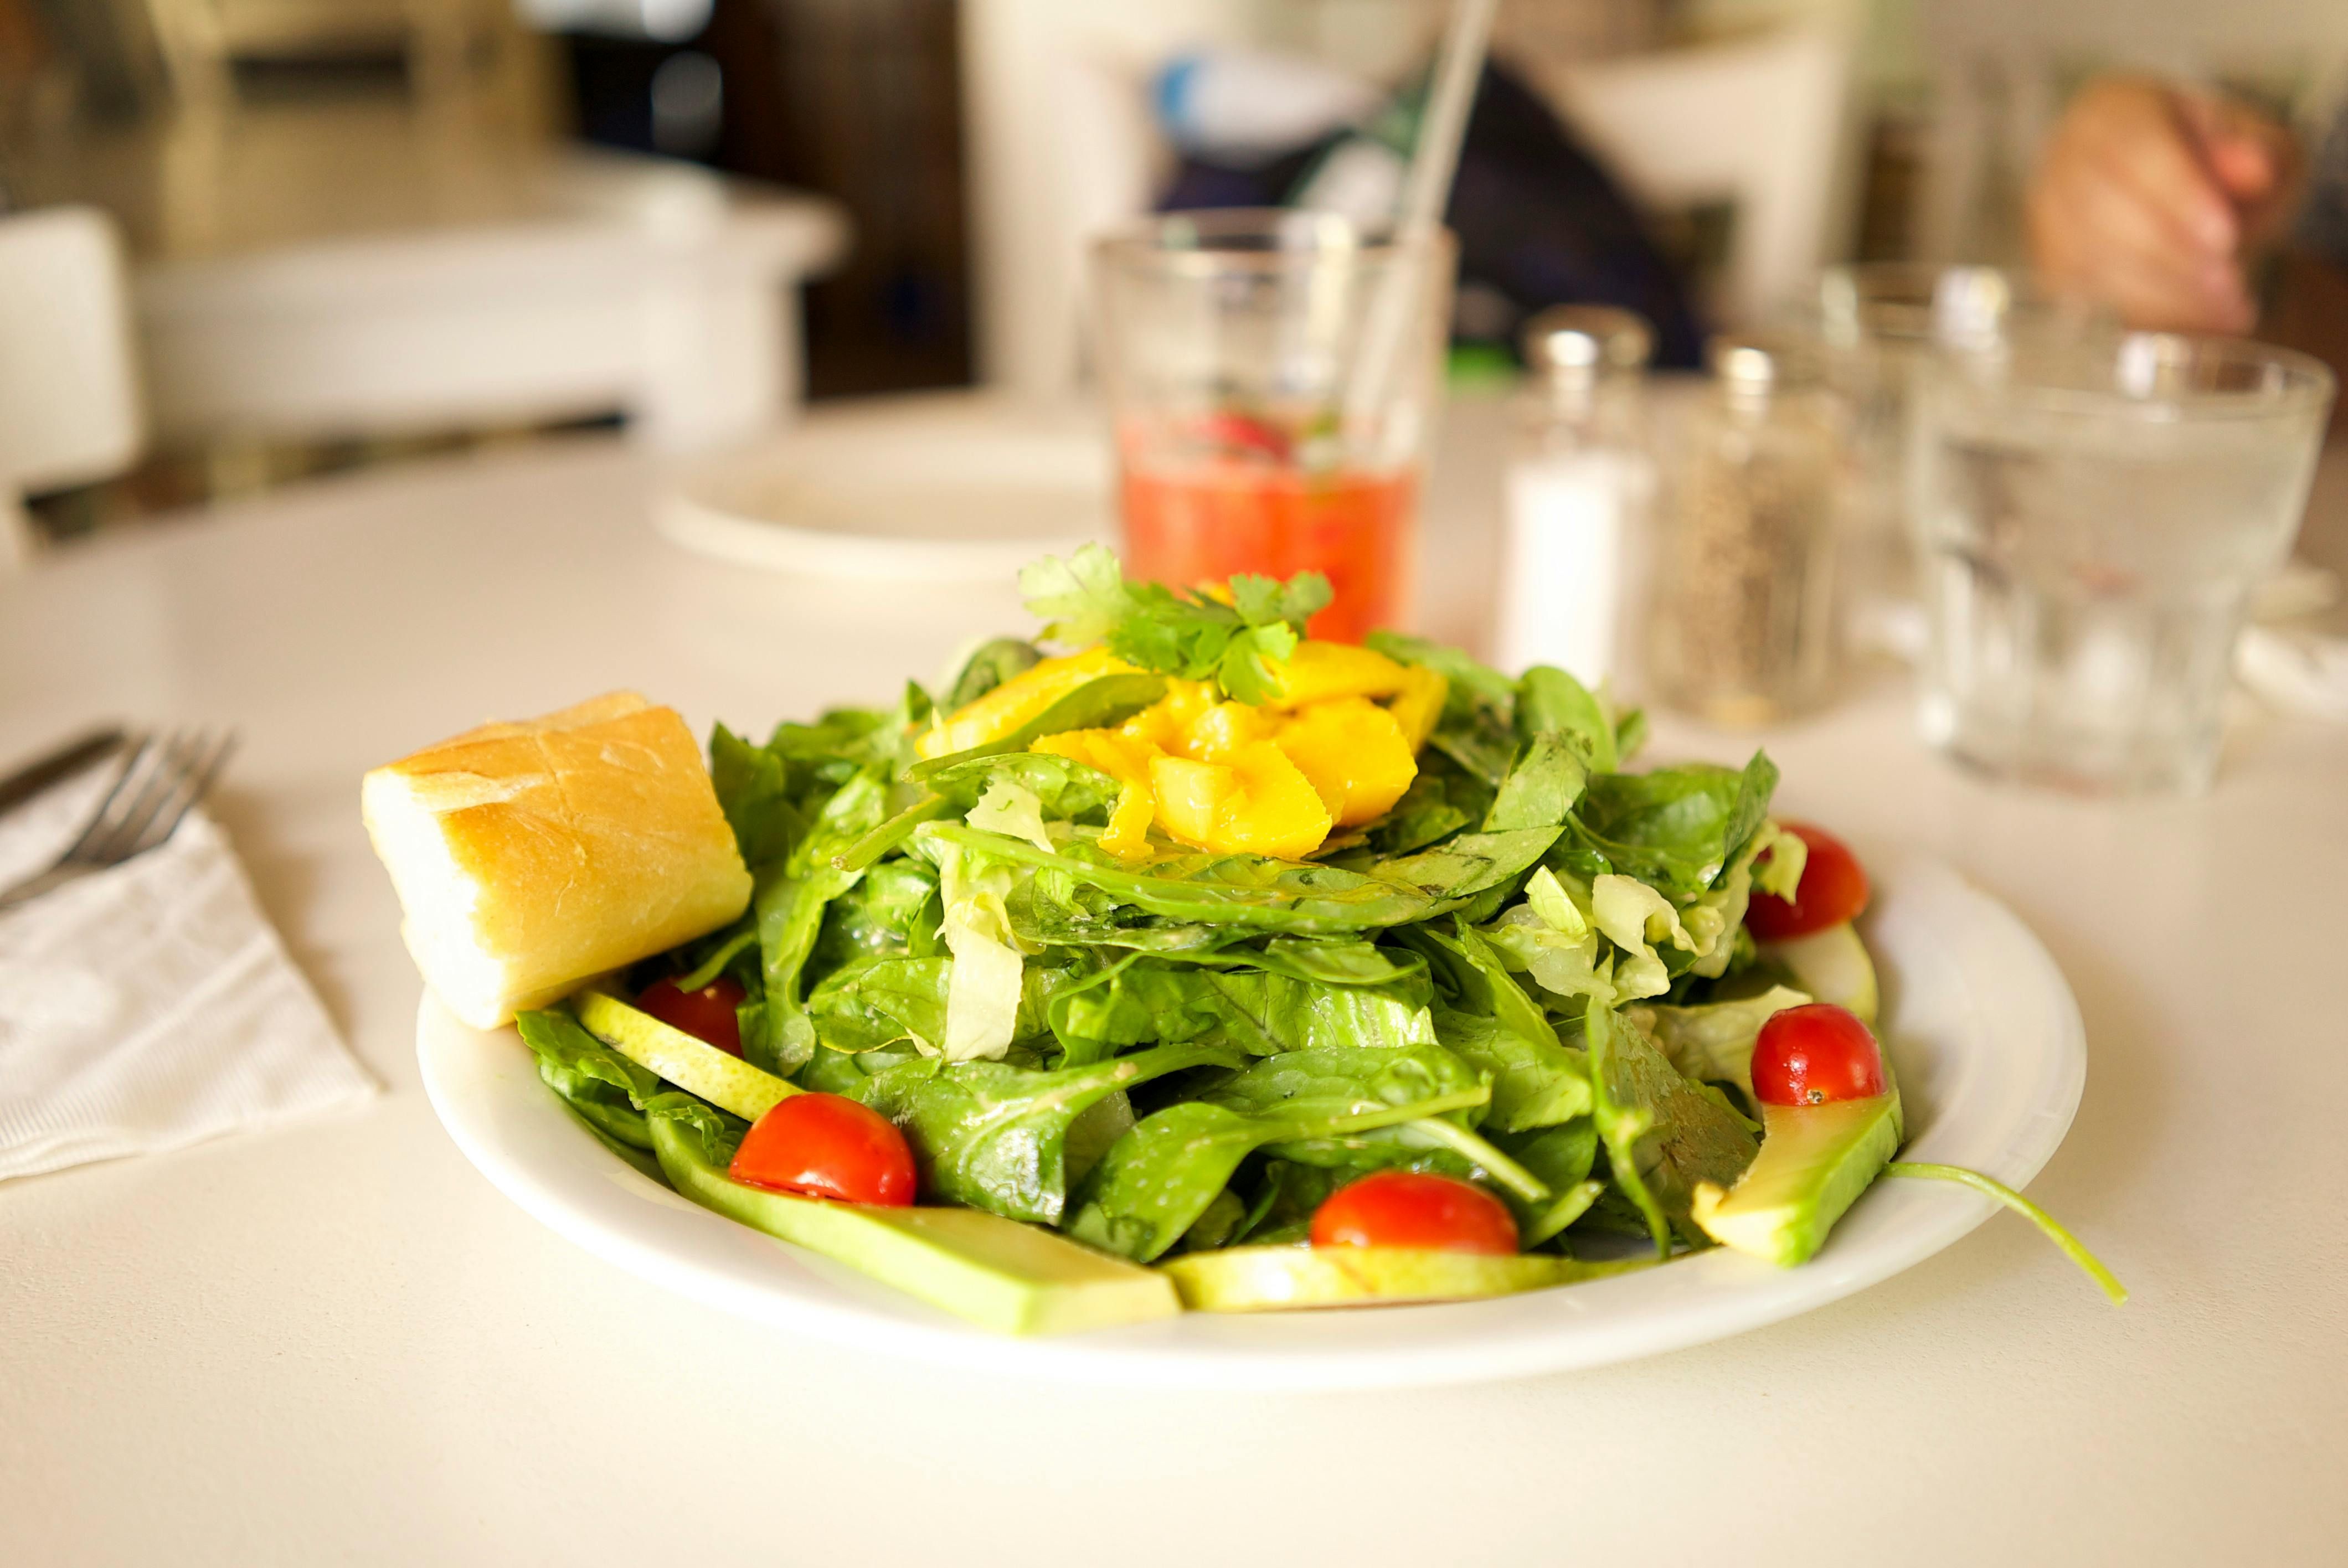 A freshly prepared healthy salad featuring mixed greens, colorful vegetables, and a sprinkle of seeds on a light background.